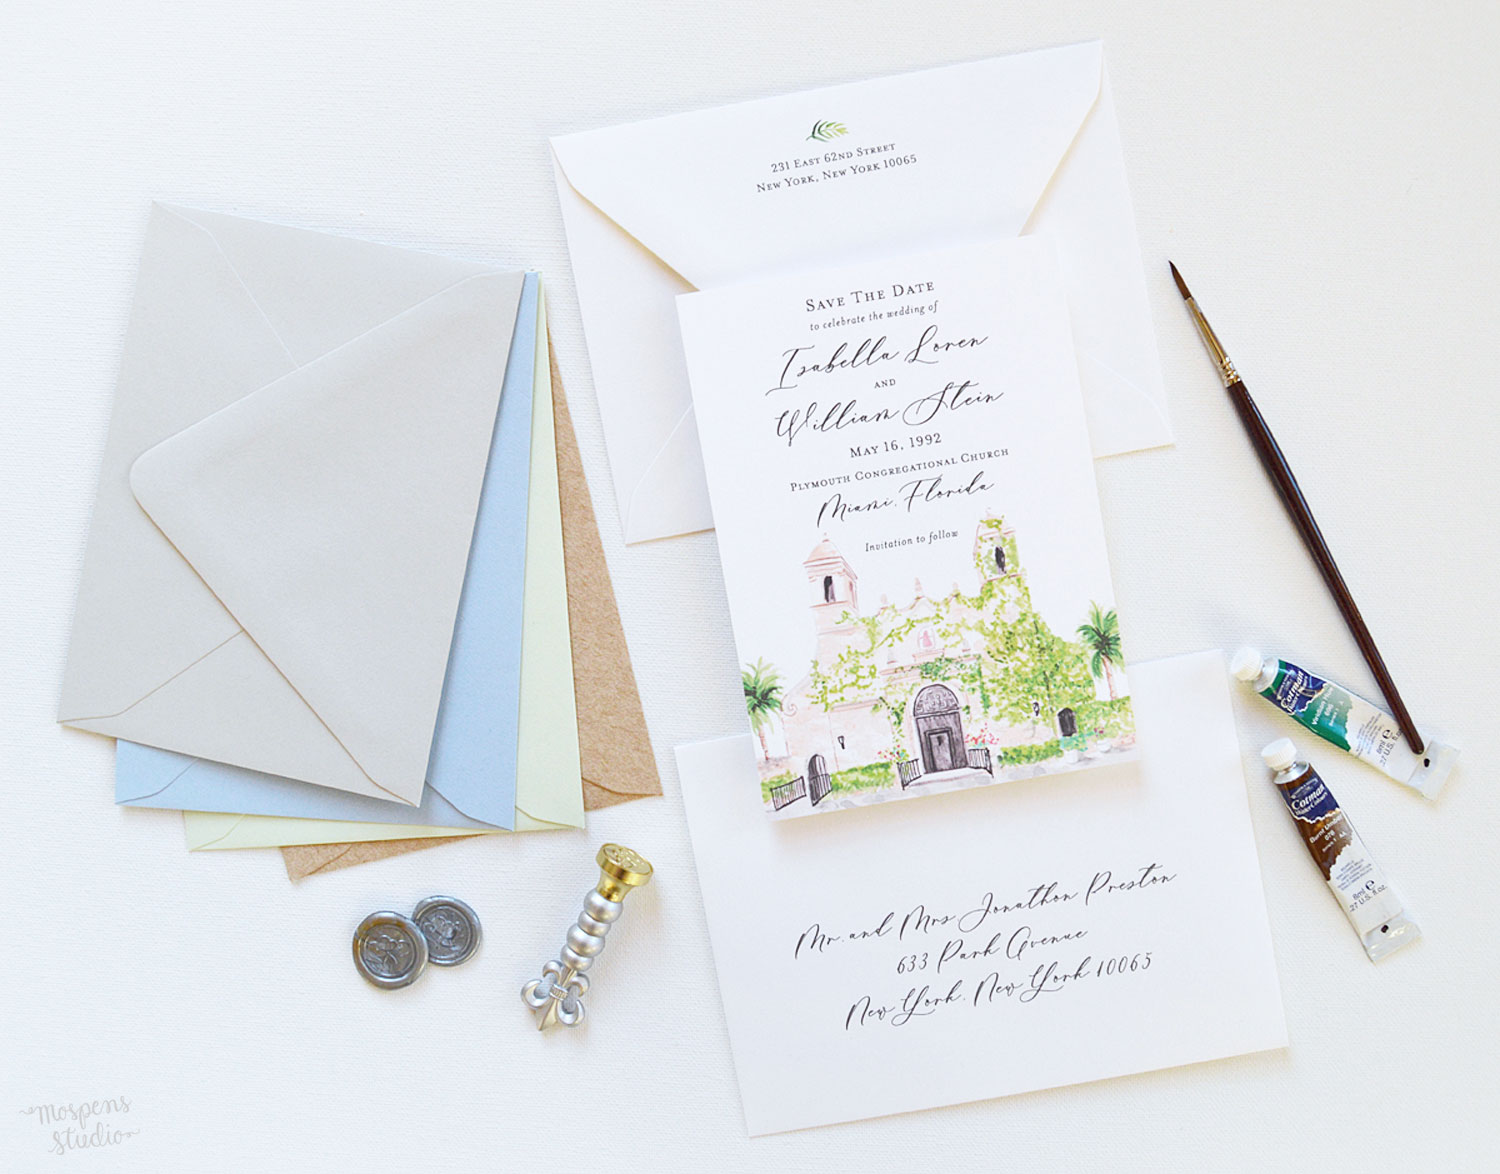 Timeline: When to order Wedding Invitations and more